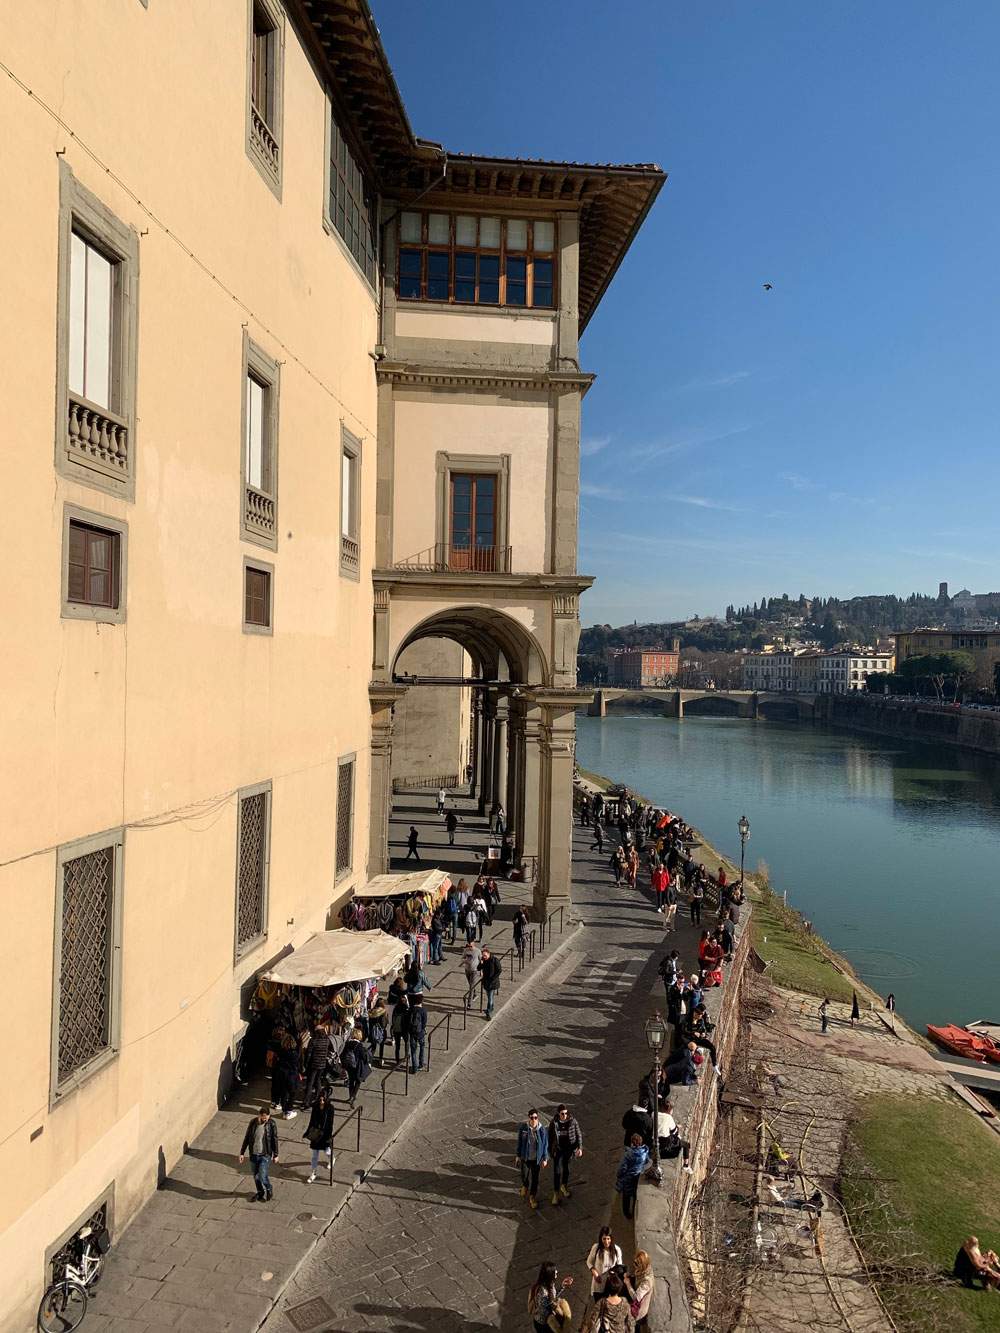 Work on the Vasari Corridor facade and inspections every two months for two years